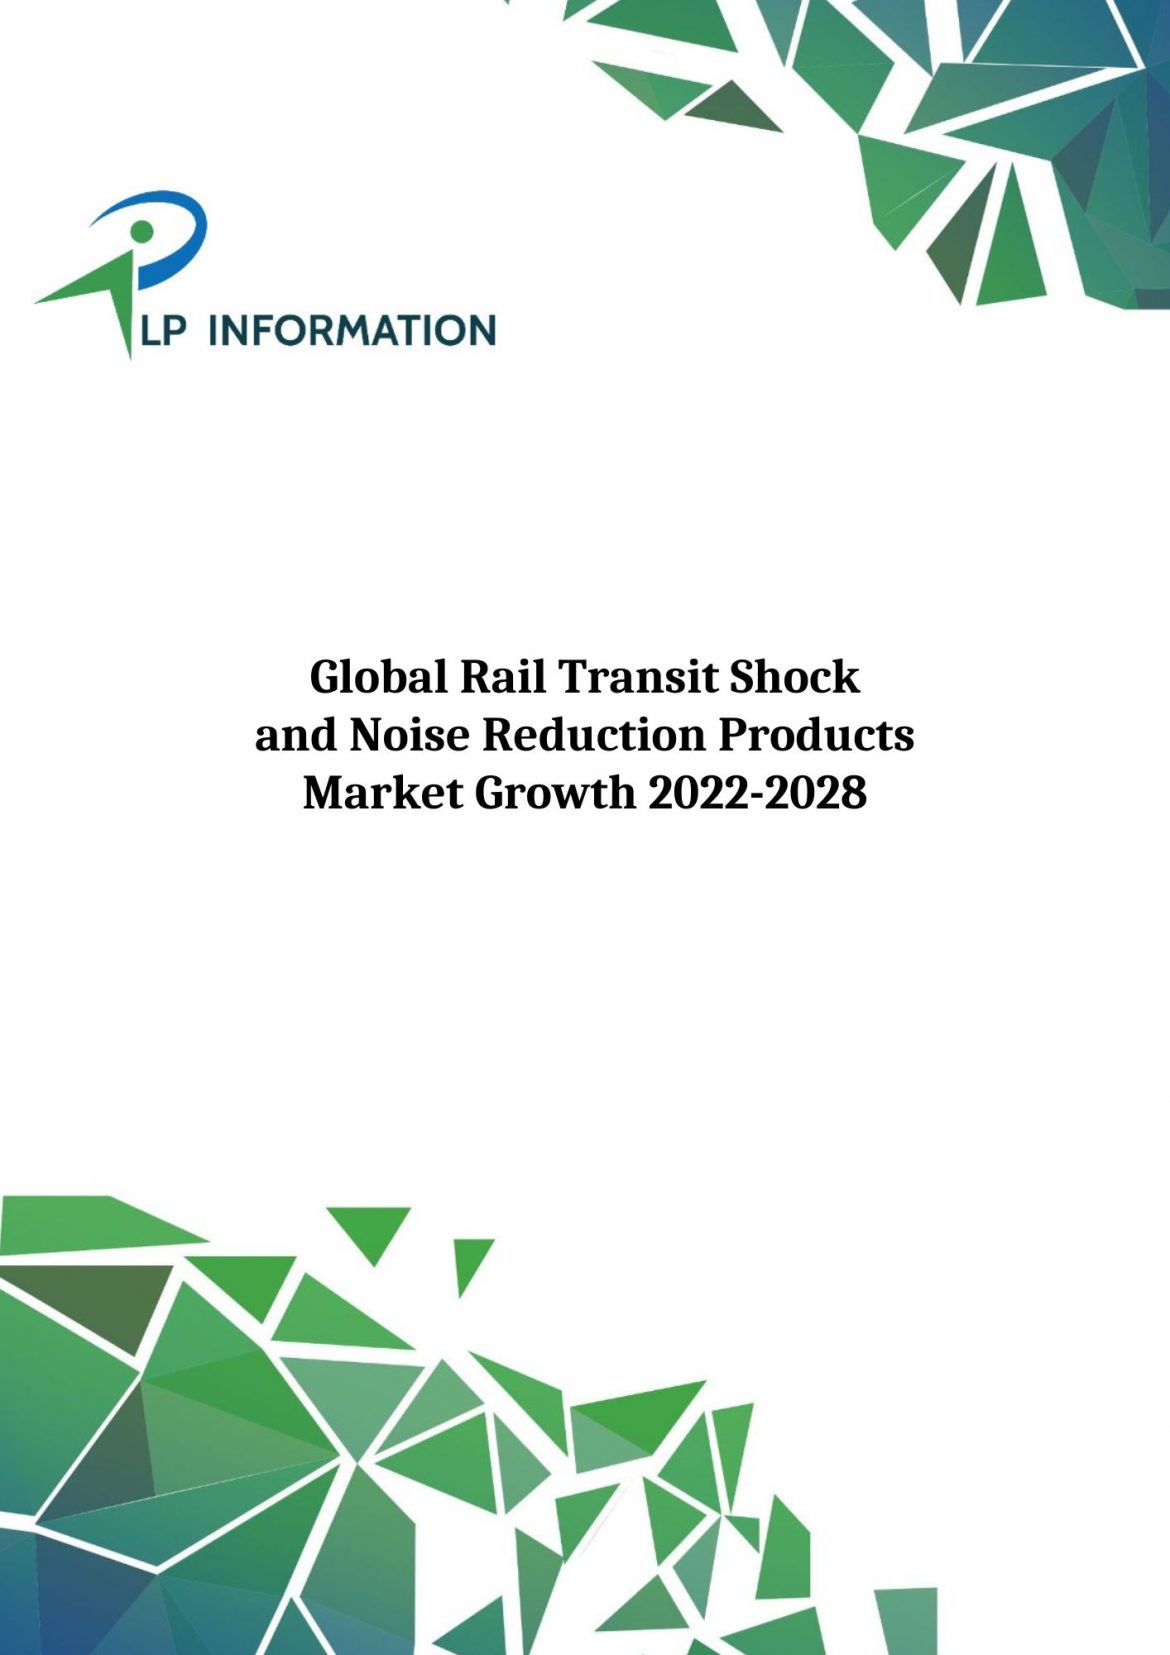 Global Rail Transit Shock and Noise Reduction Products Market Growth 2022-2028